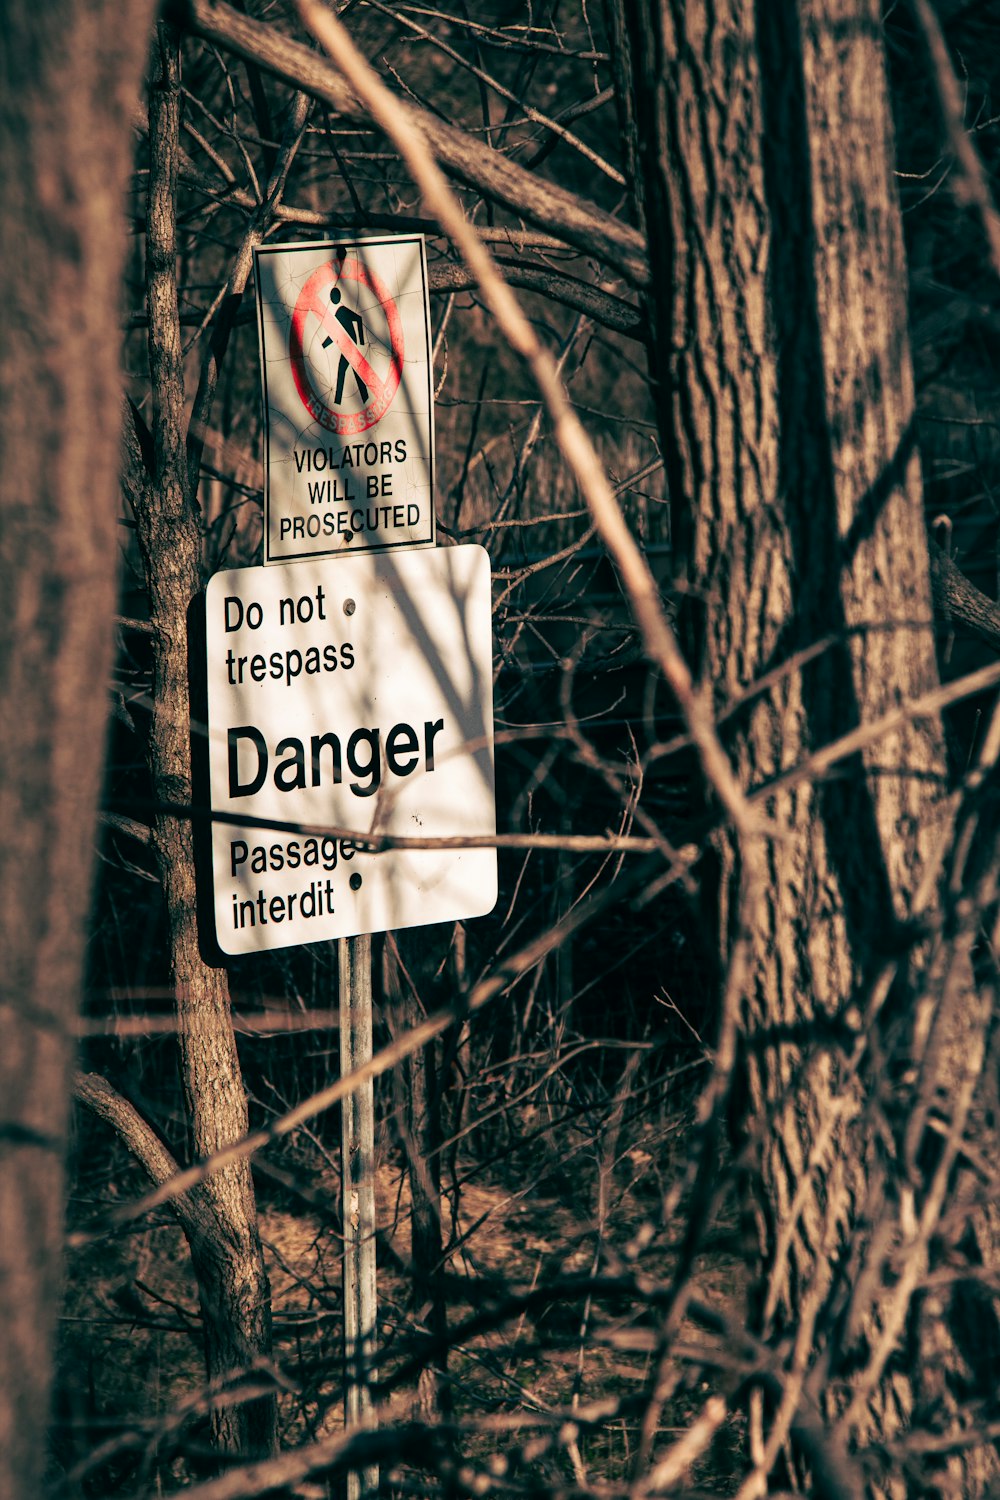 a do not trespass sign in a wooded area